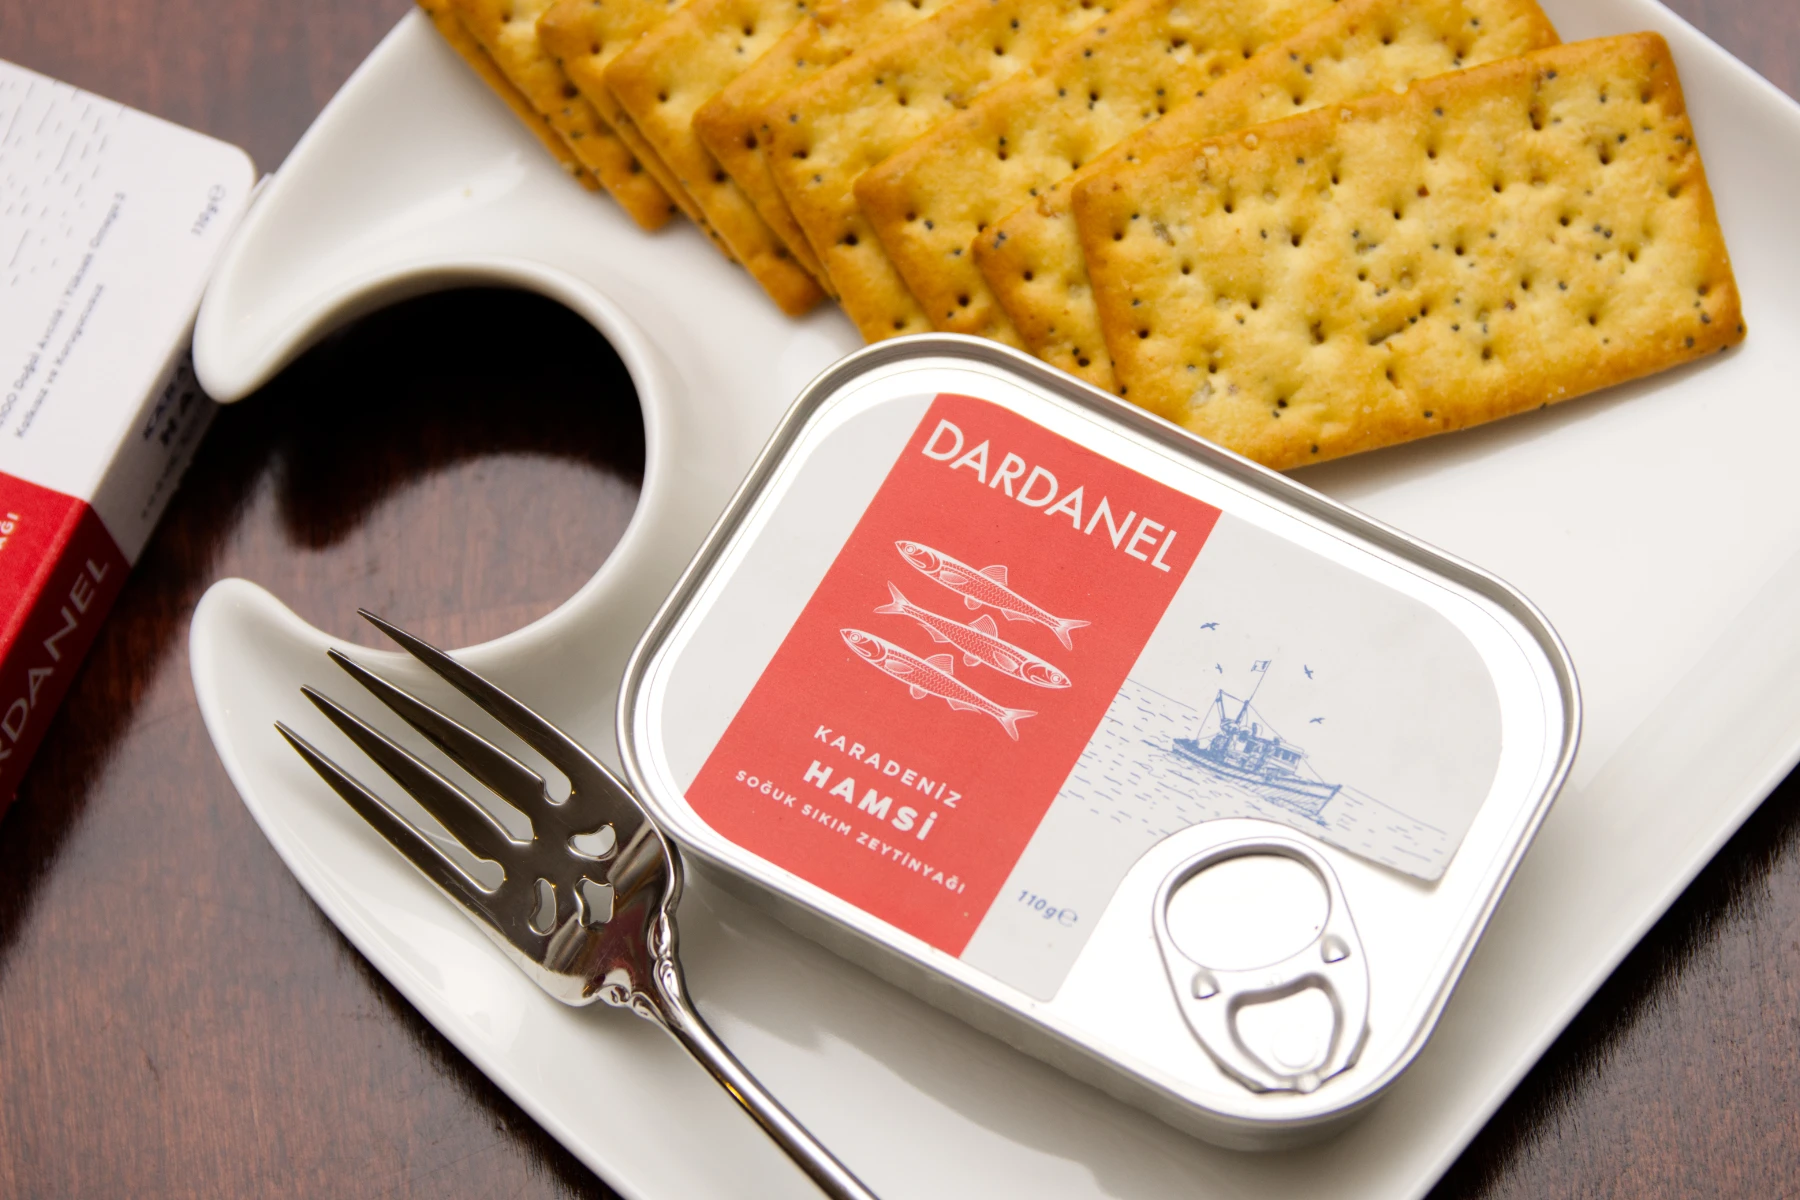 Tin of Dardanel anchovies on a plate with crackers. There is a sticker label adhered to the lid of the tin.